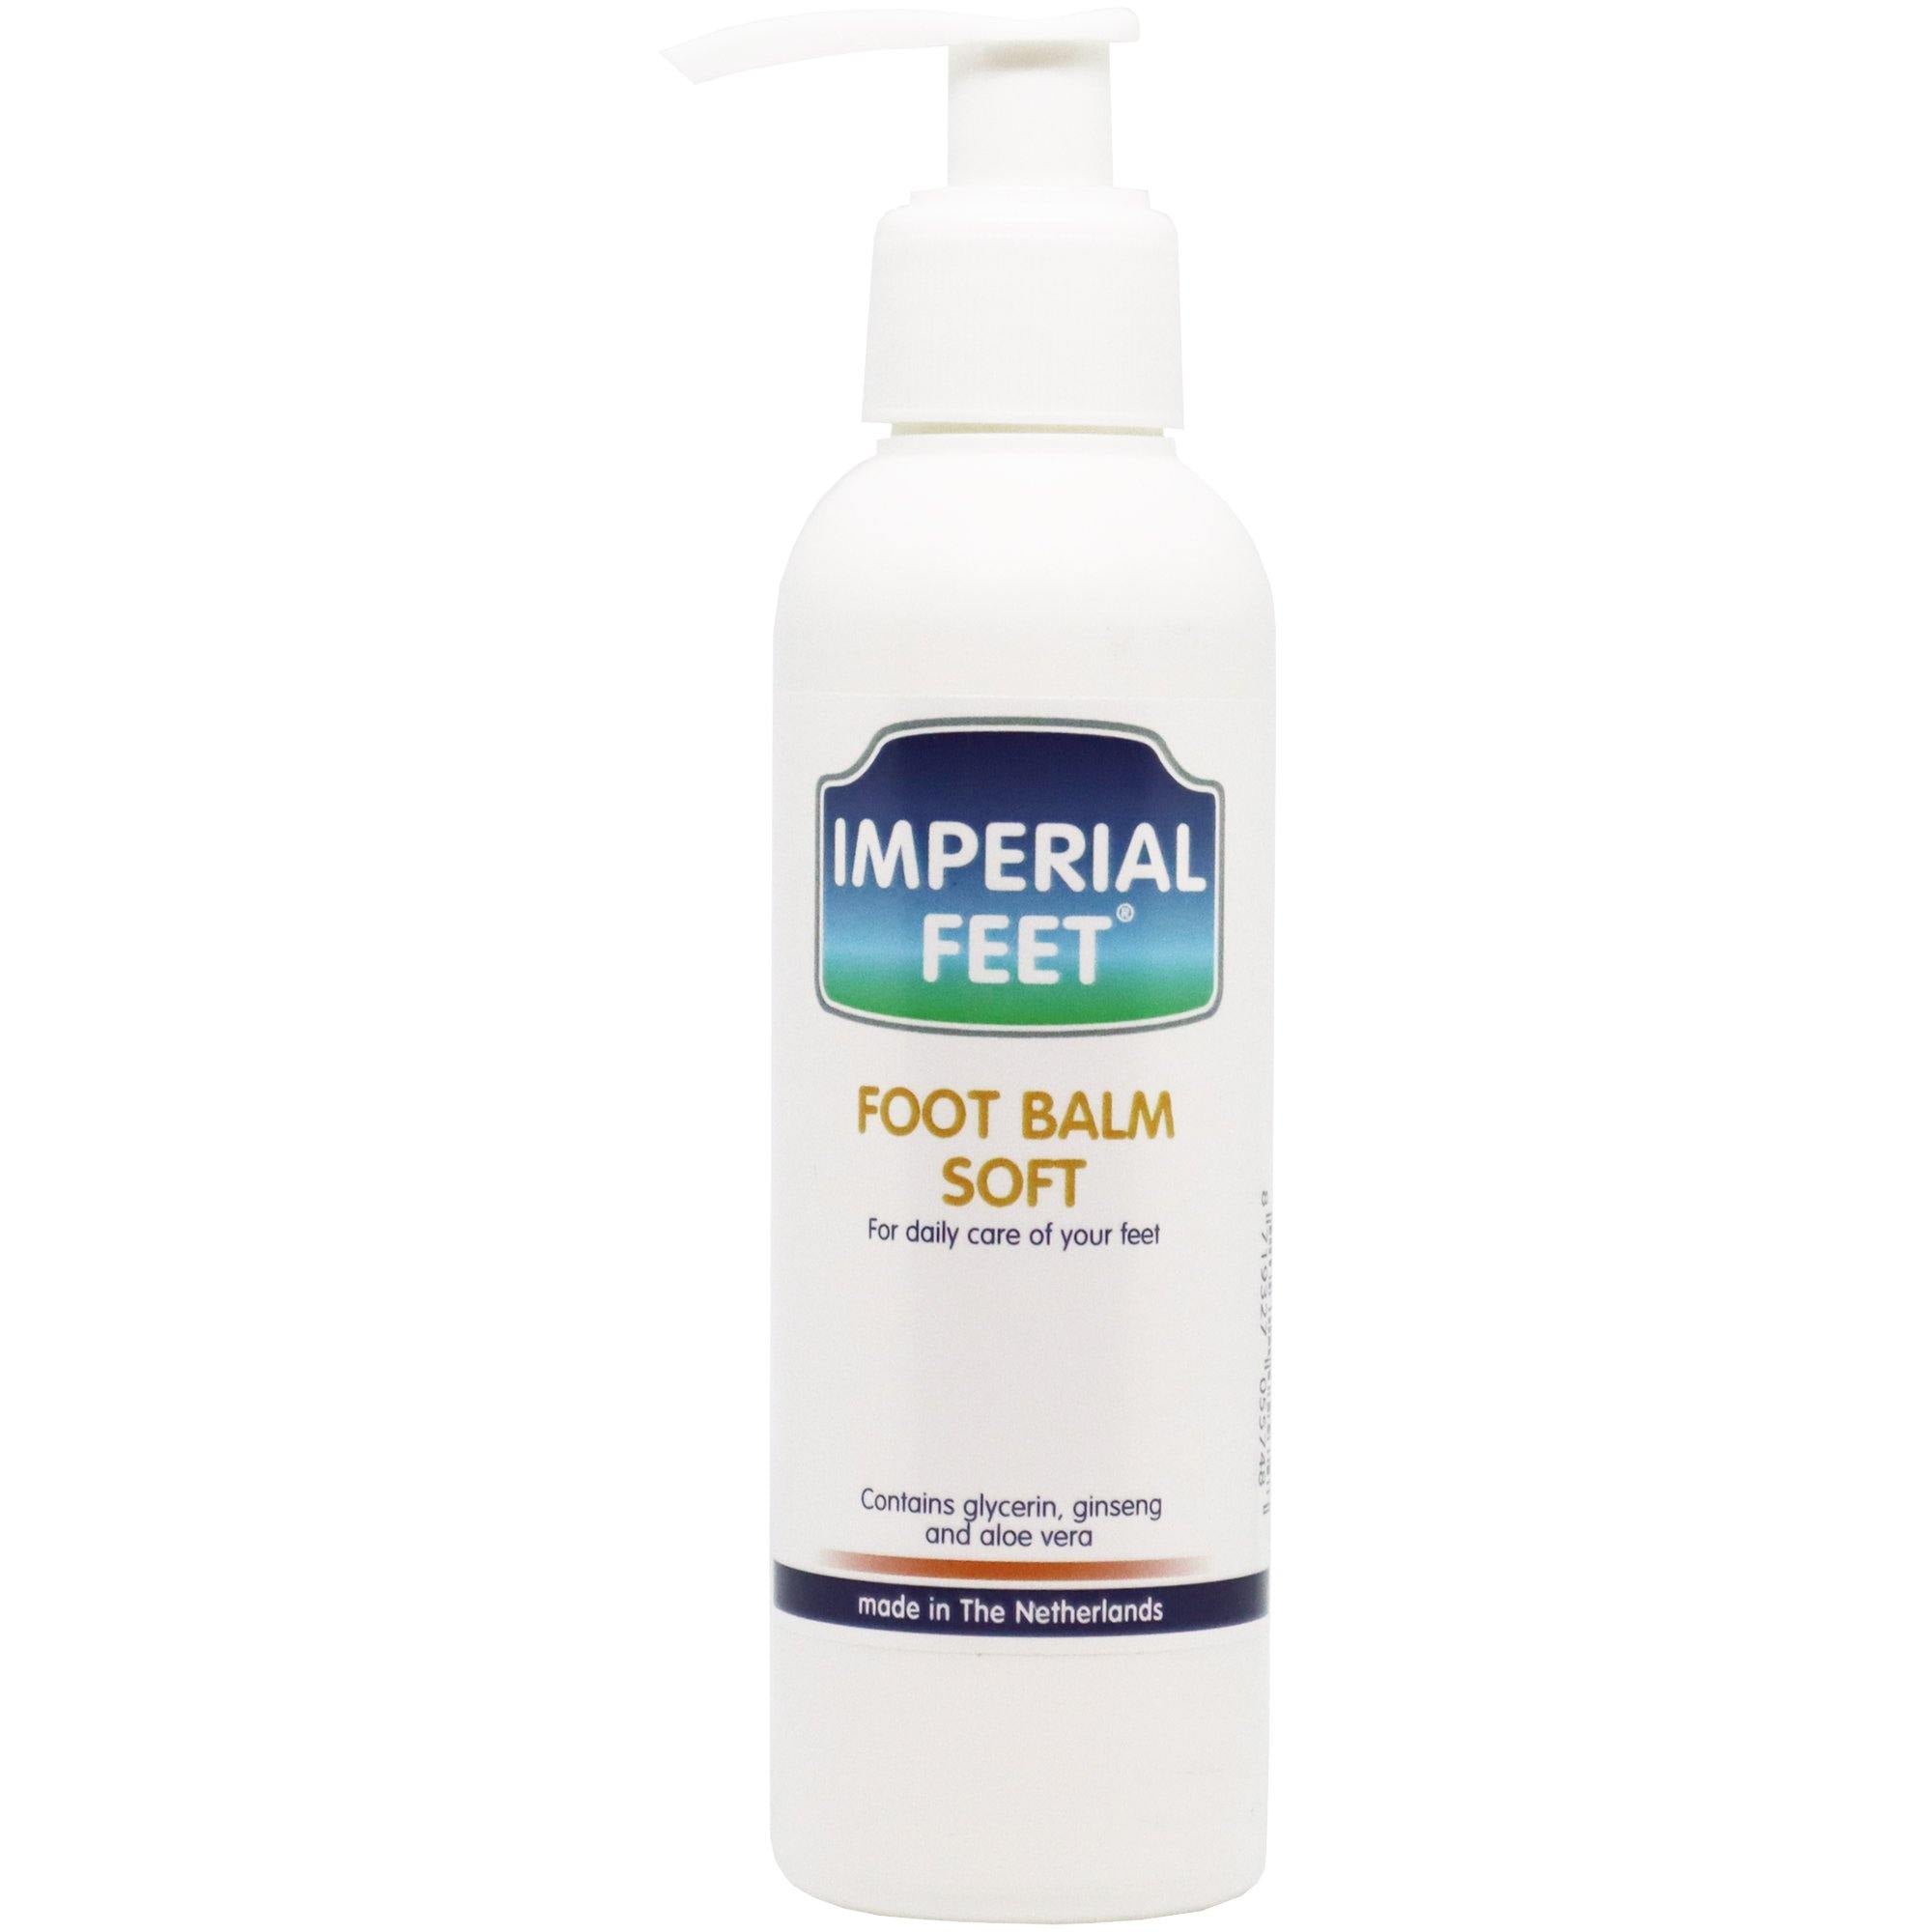 Foot Balm Soft - Imperial Feet - Foot care products - B2C, Dry and Cracked Feet